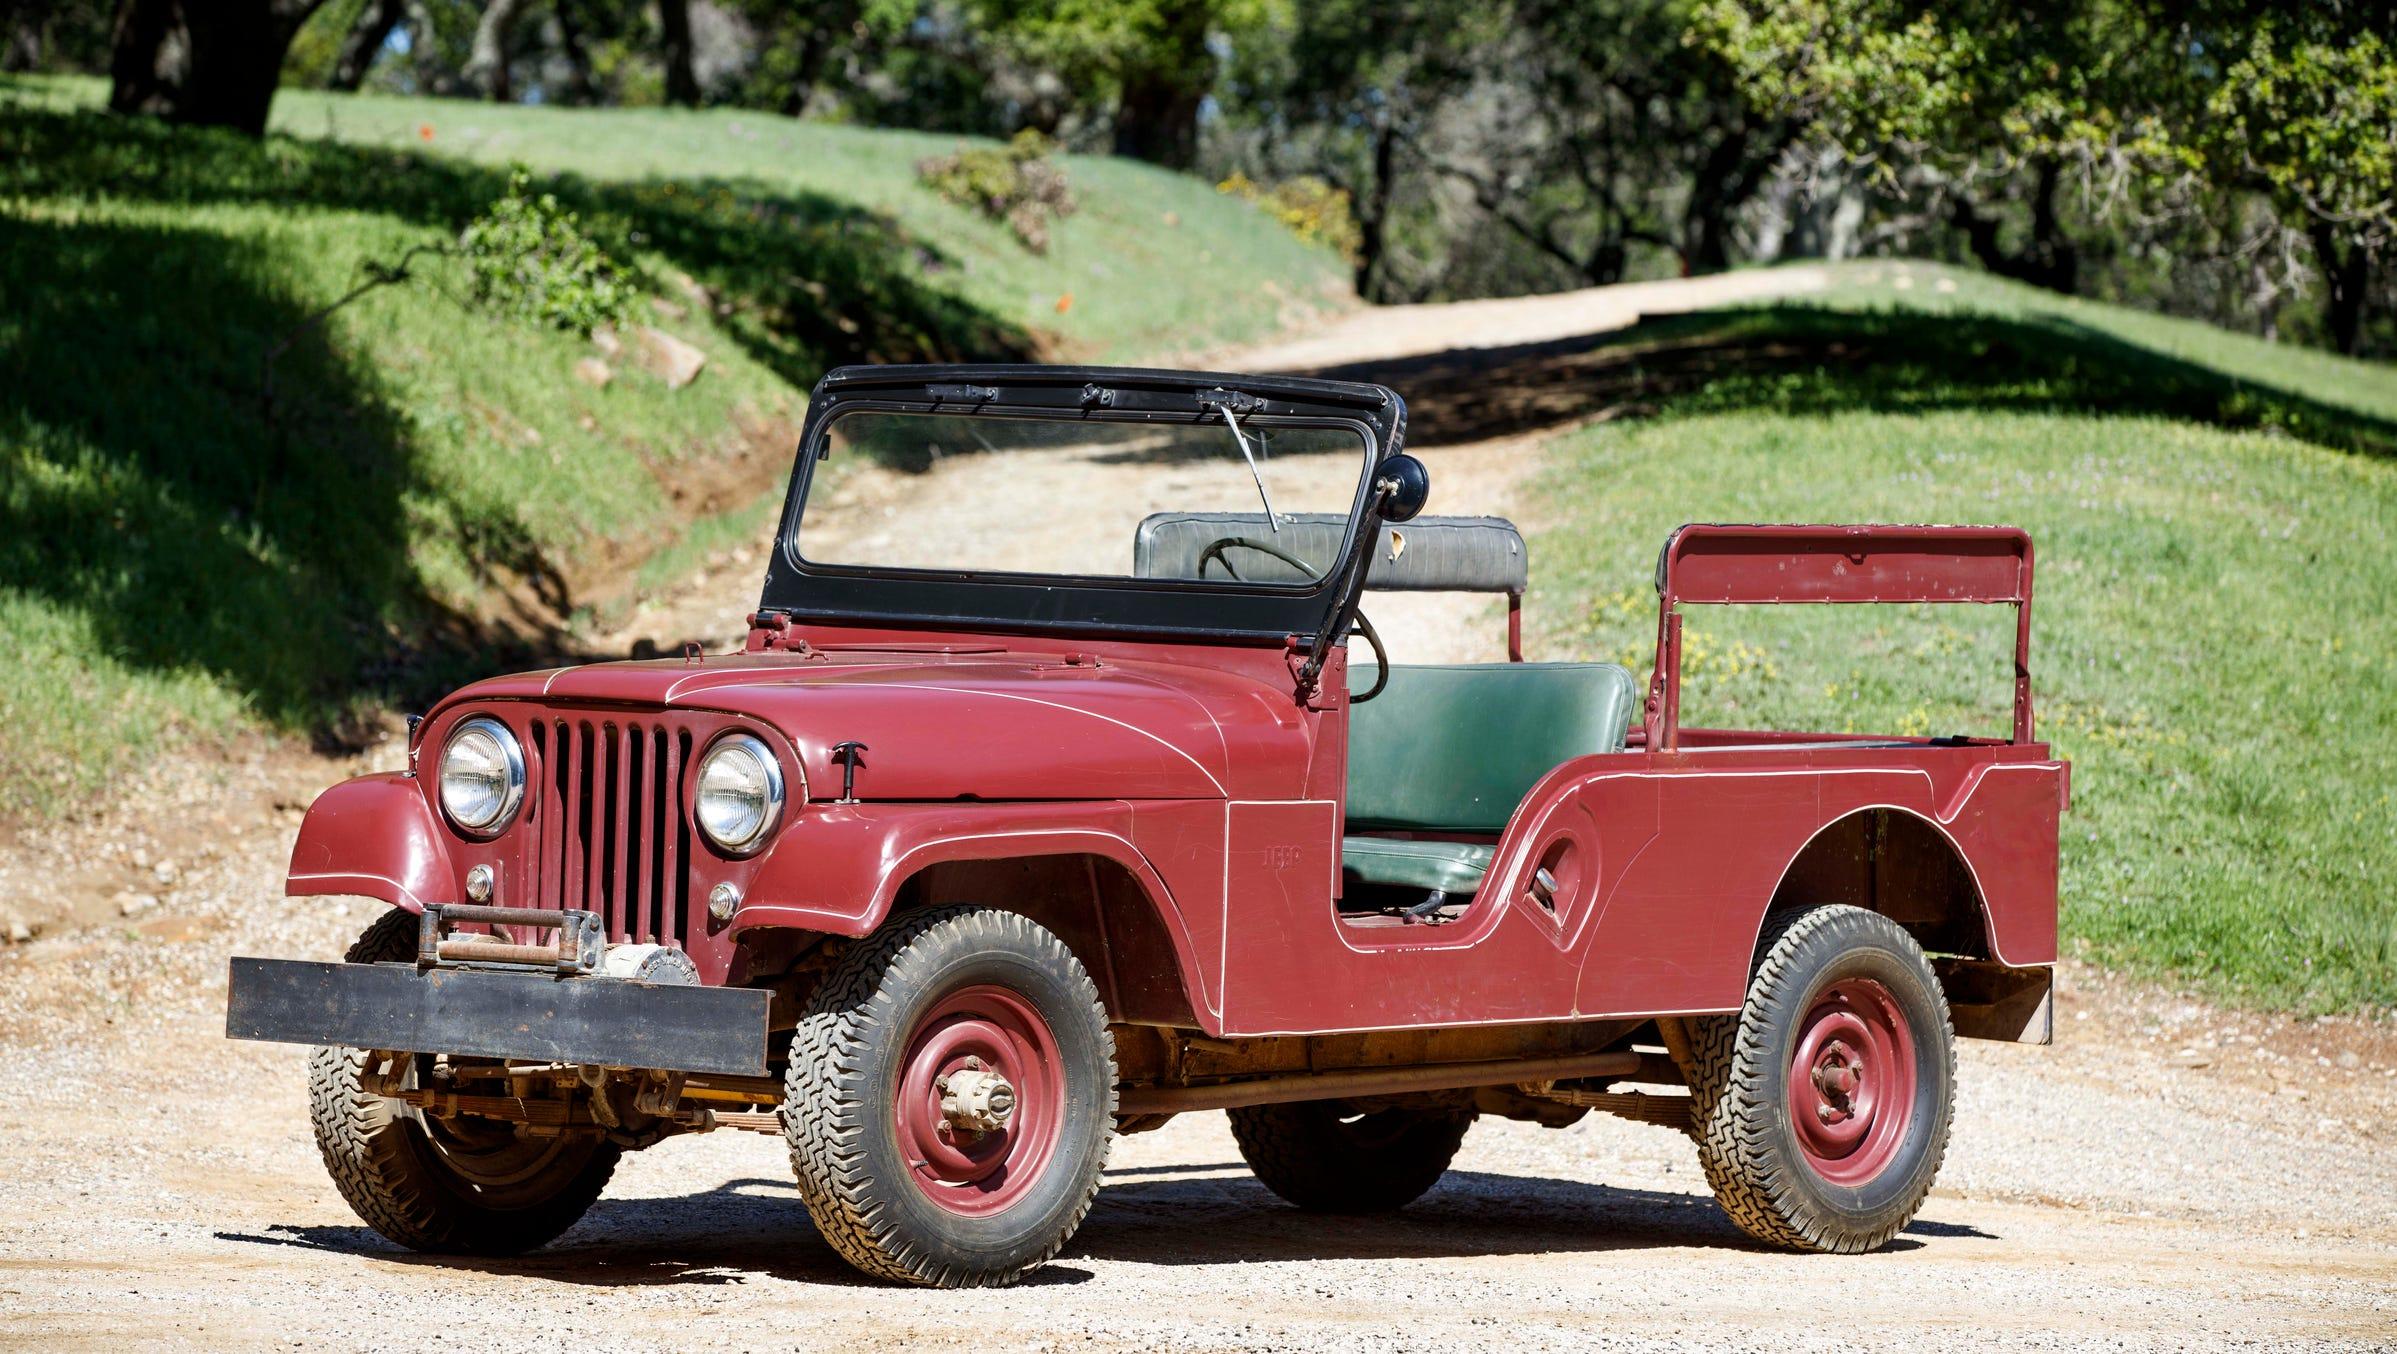 Ronald Reagans Willys Jeep